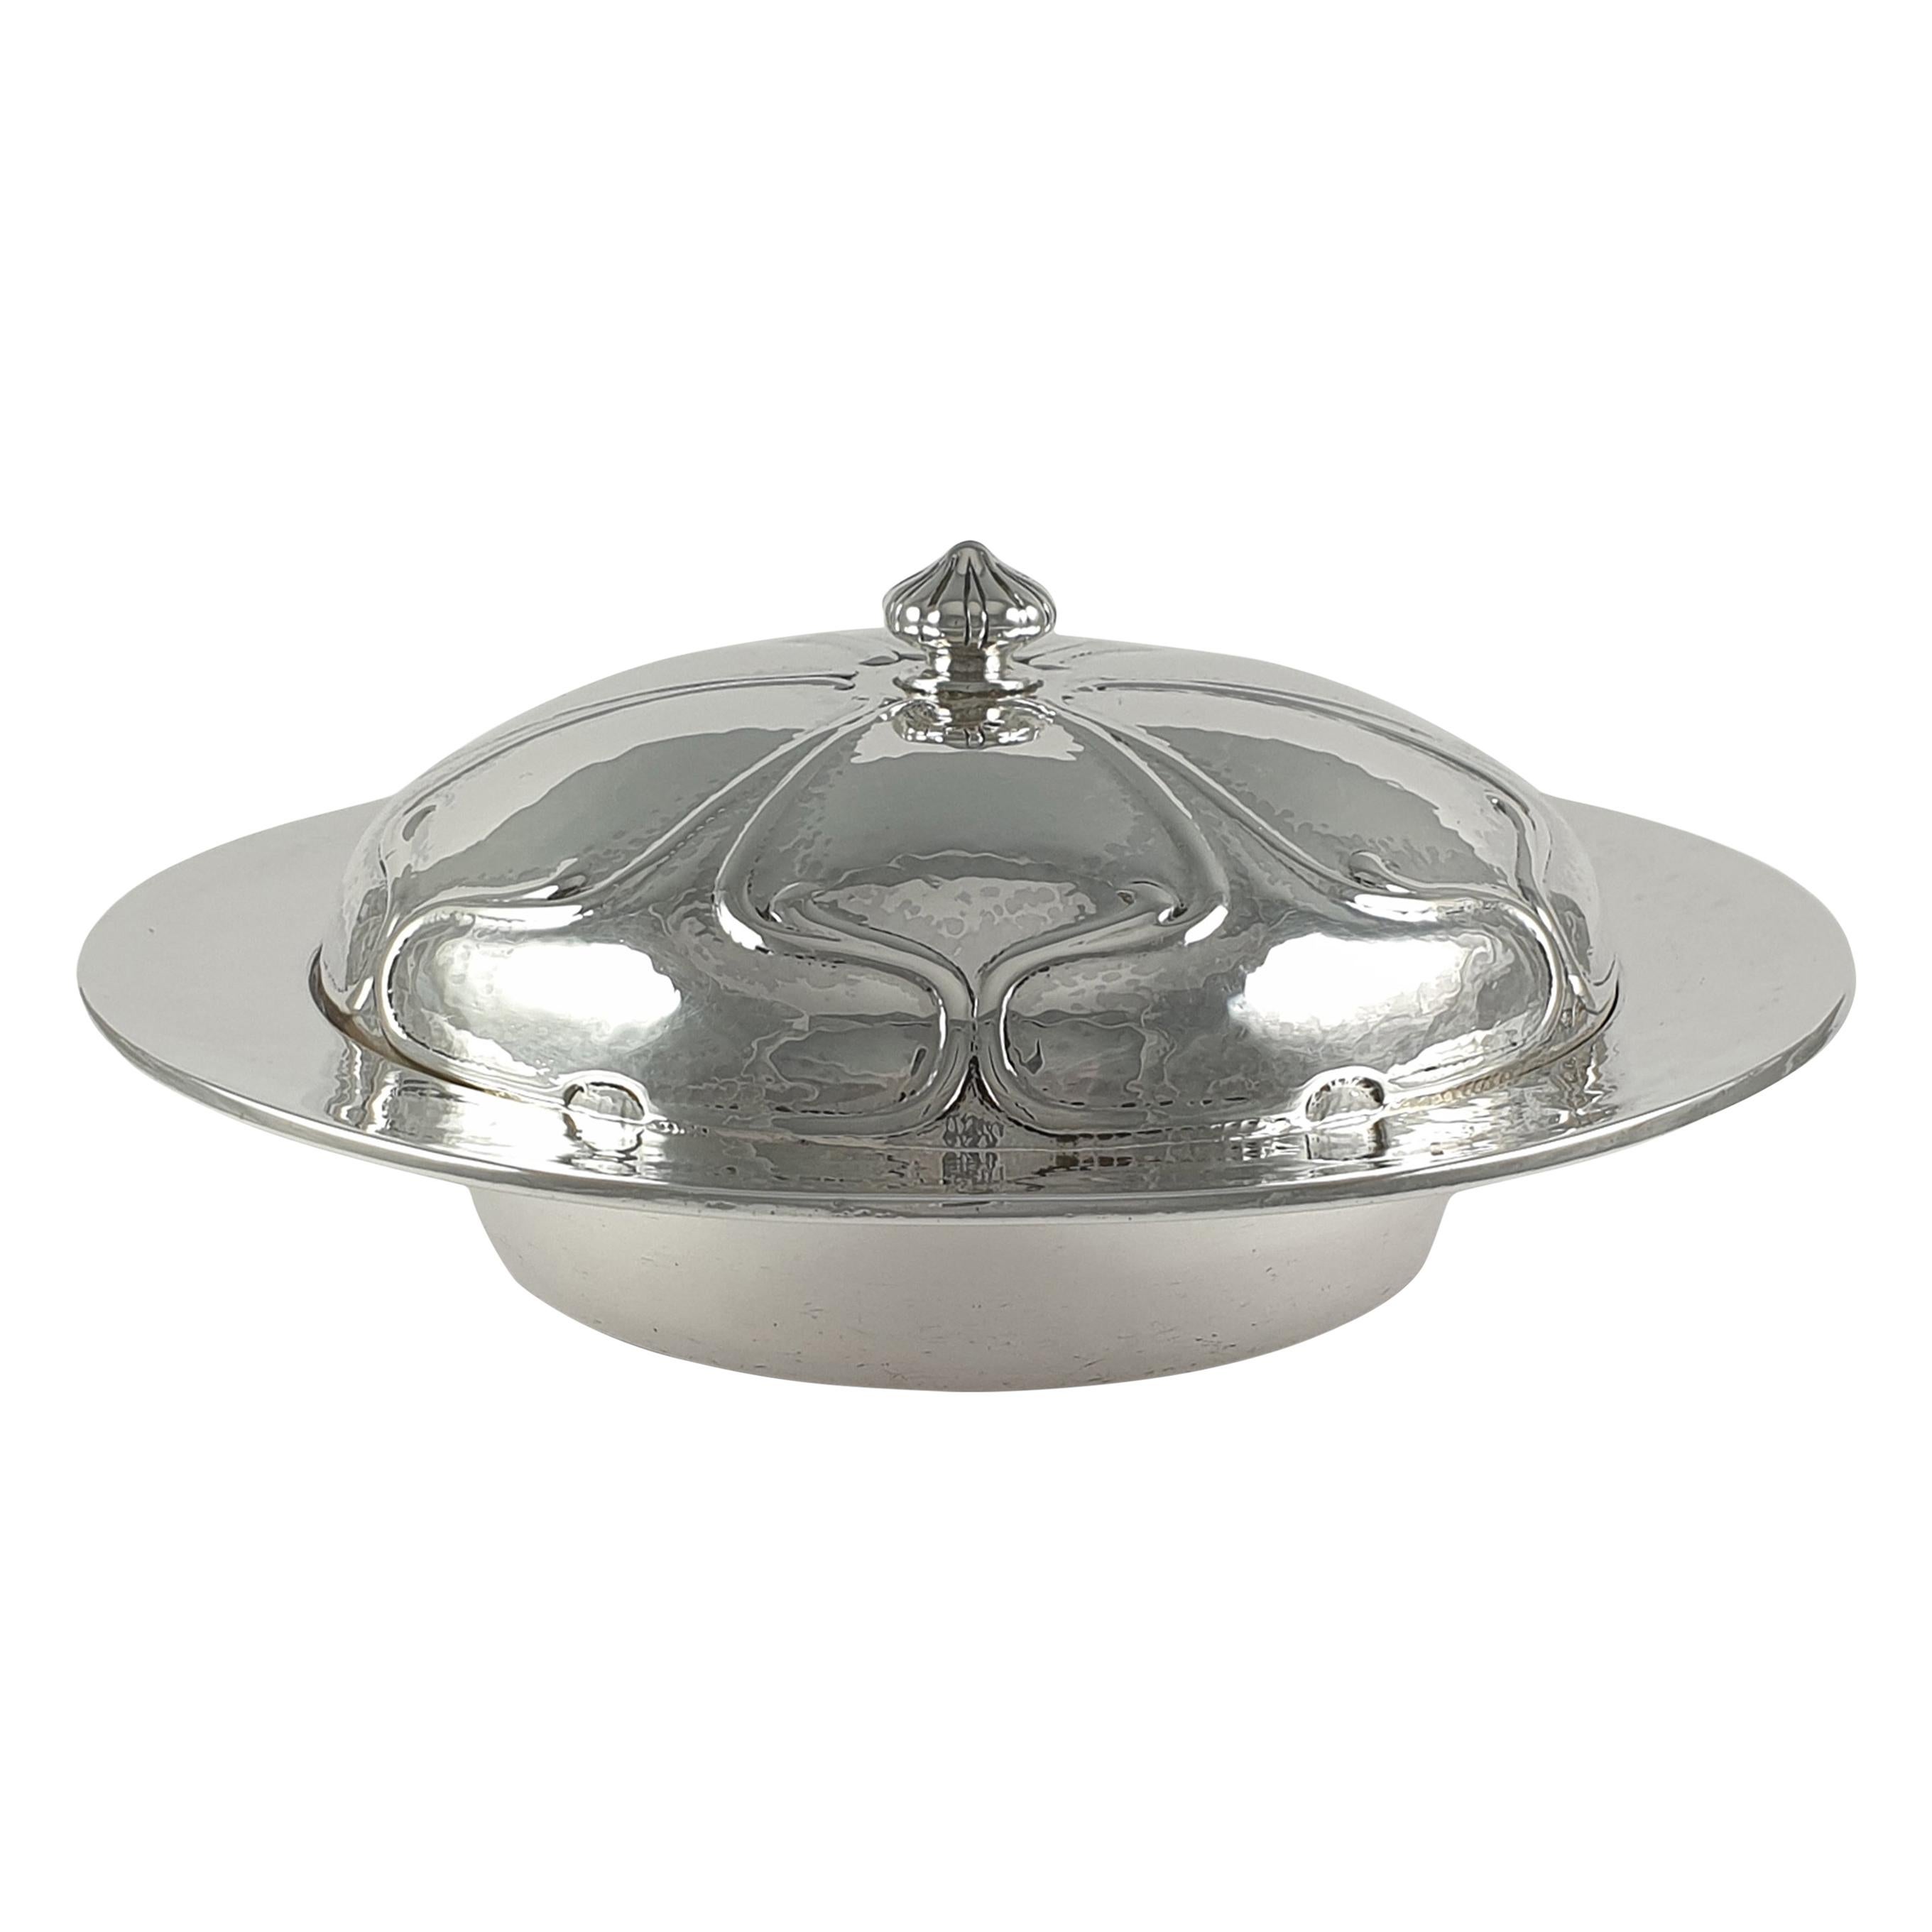 Liberty & Co Sterling Silver Muffin Dish by Oliver Baker